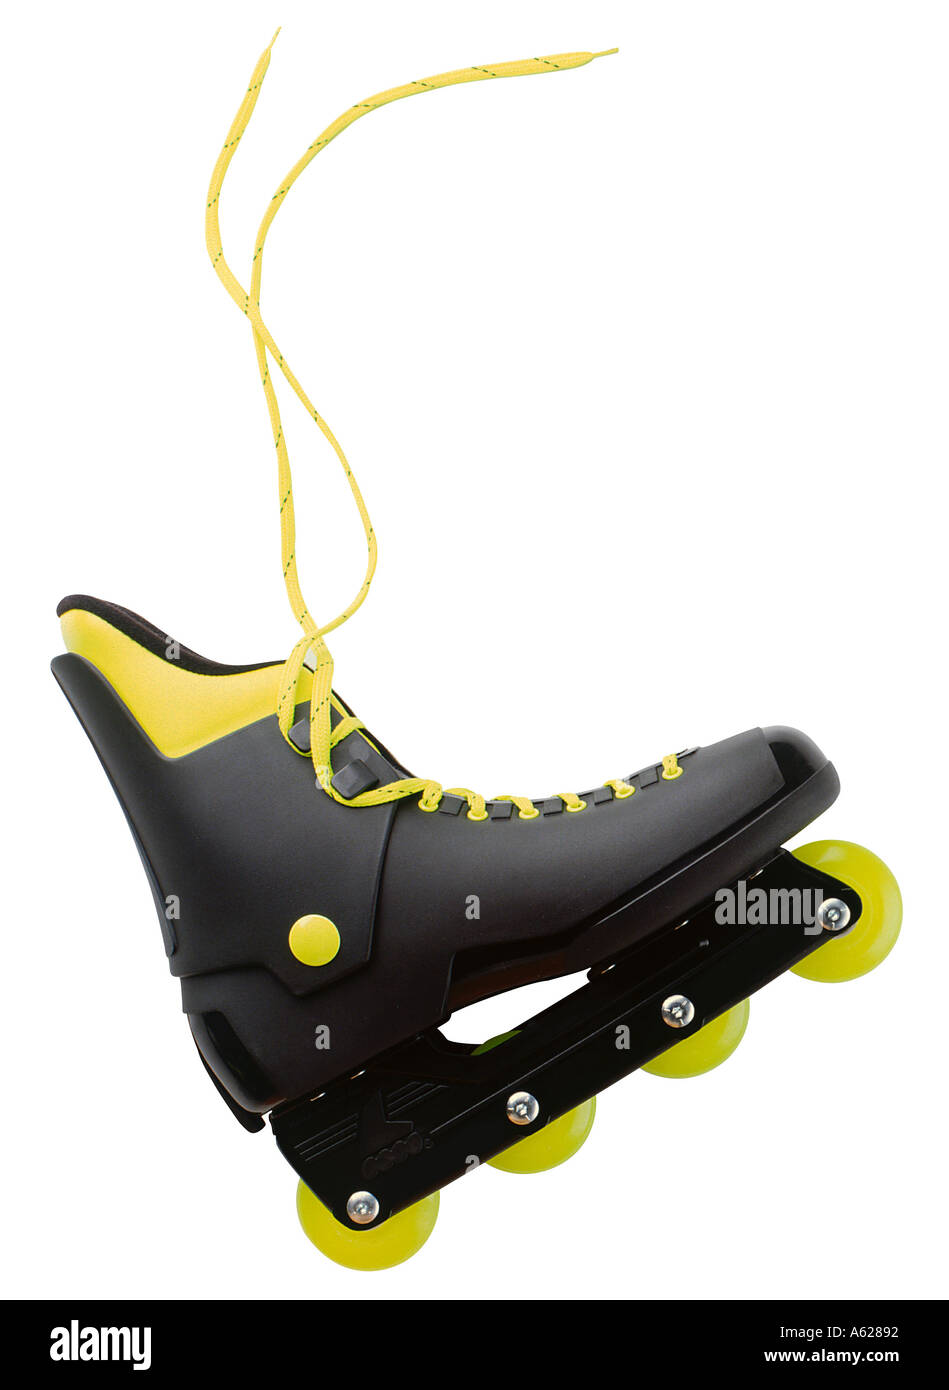 Inline skate with laces Stock Photo